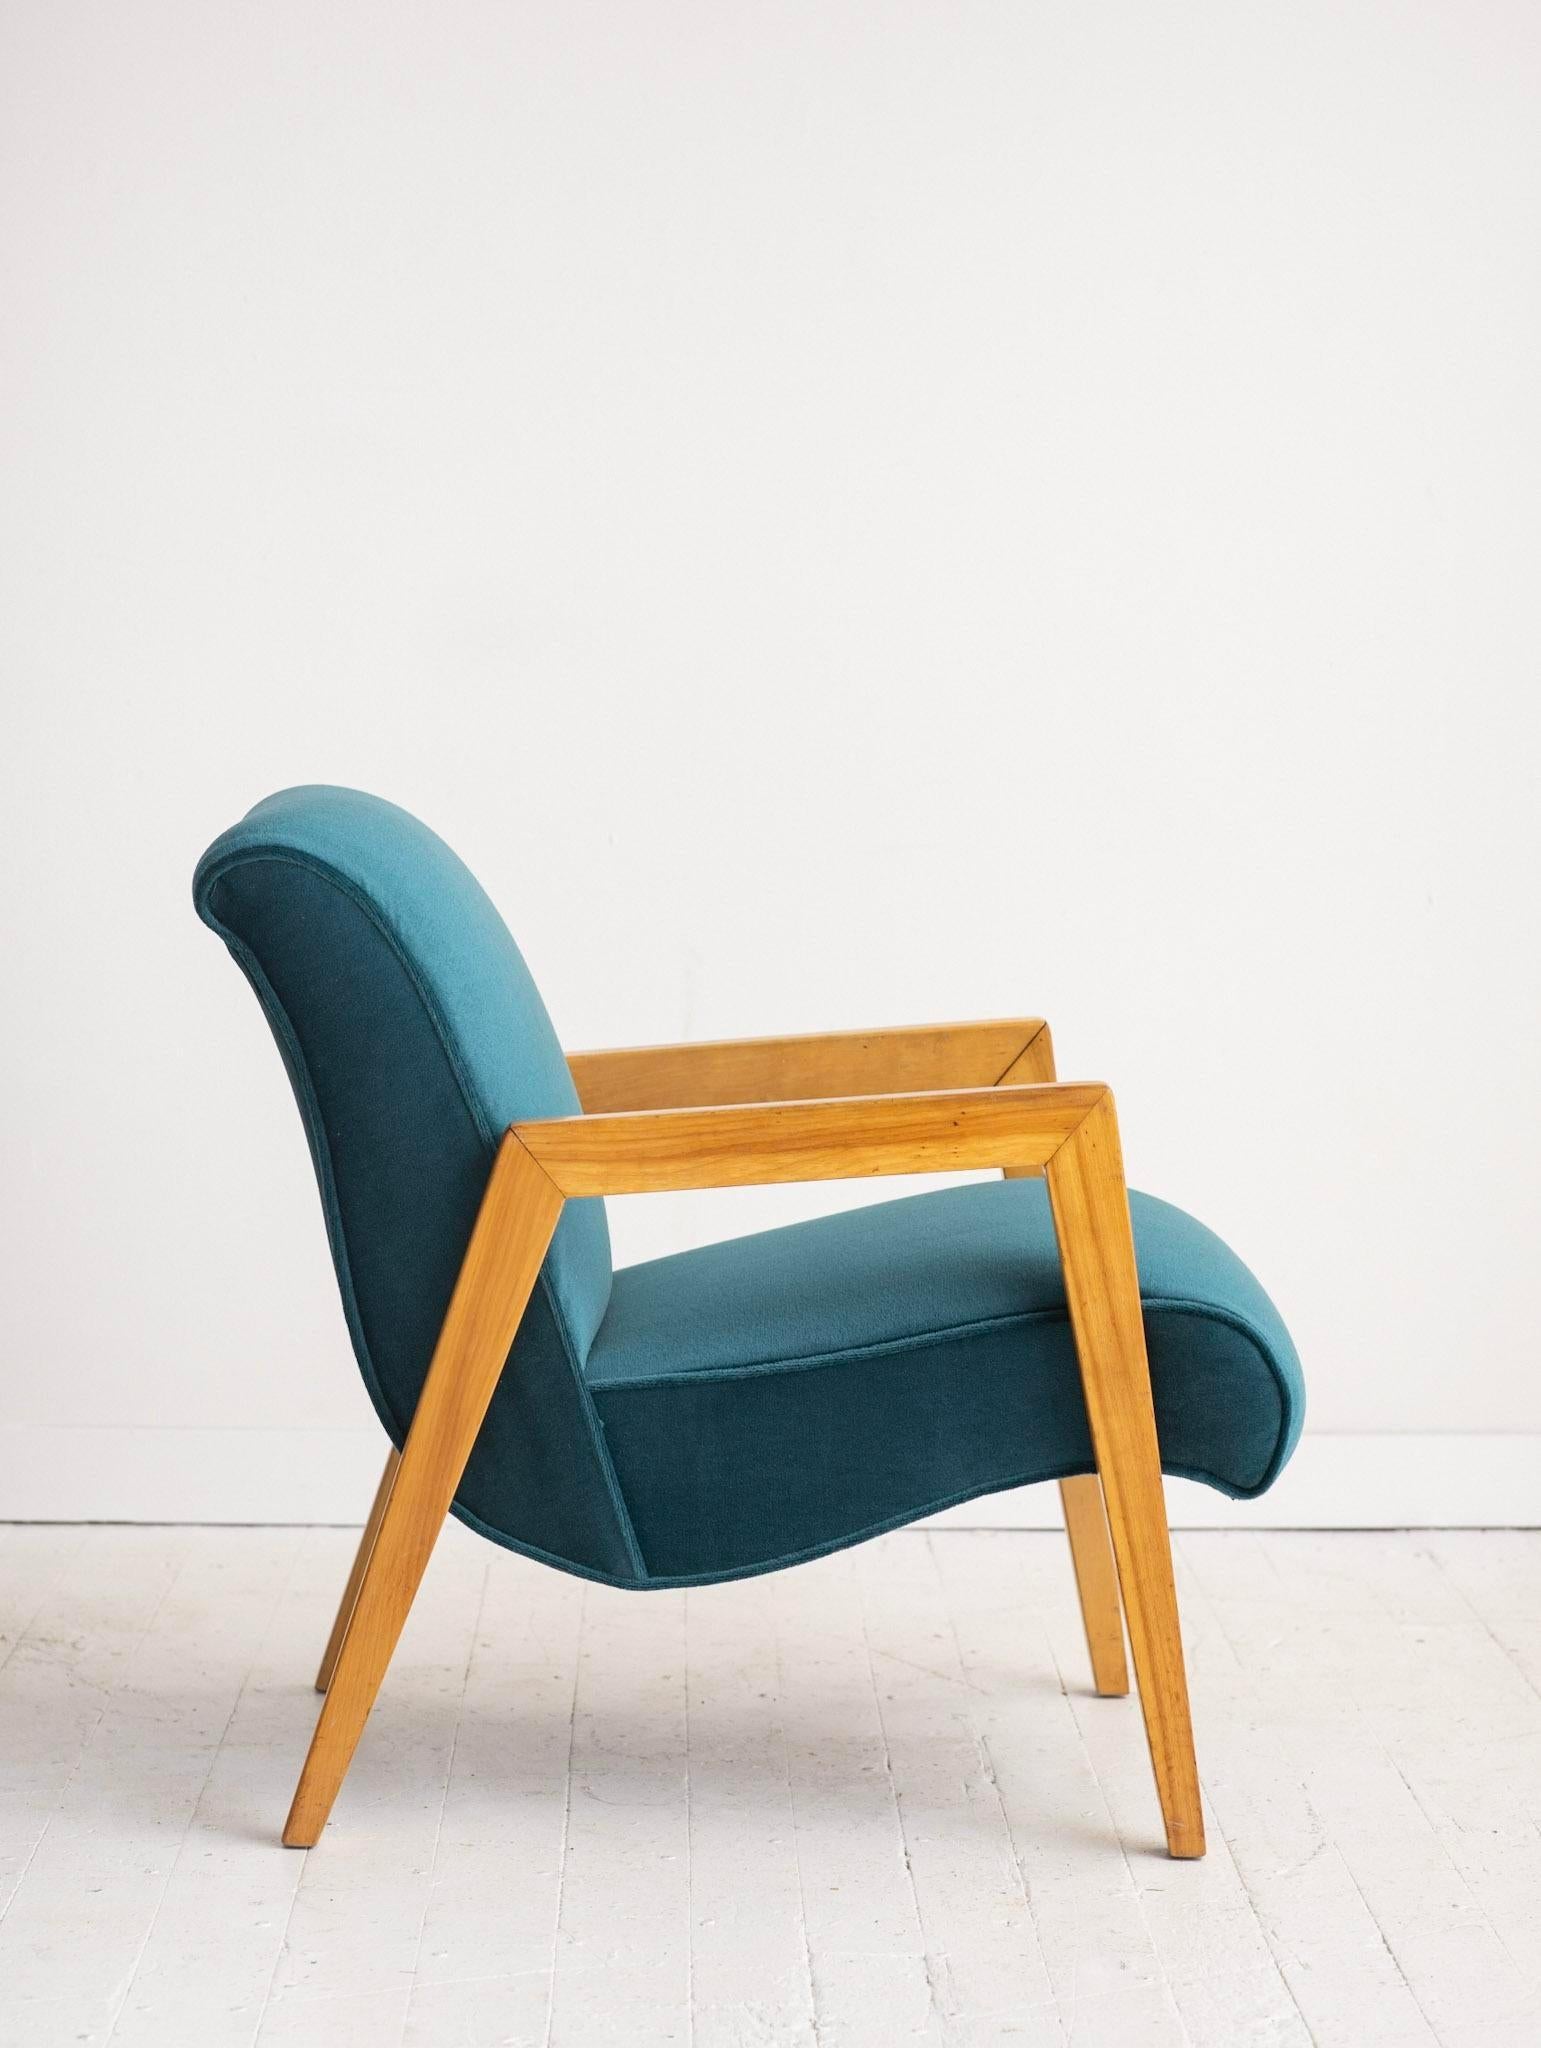 Scoop chair by Leslie Diamond for Conant Ball. Reupholstered in teal mohair. Blonde wood frame.
There is no tag found on this chair. It has been reupholstered and the upholsterer did not keep it. Arm height is 21.5